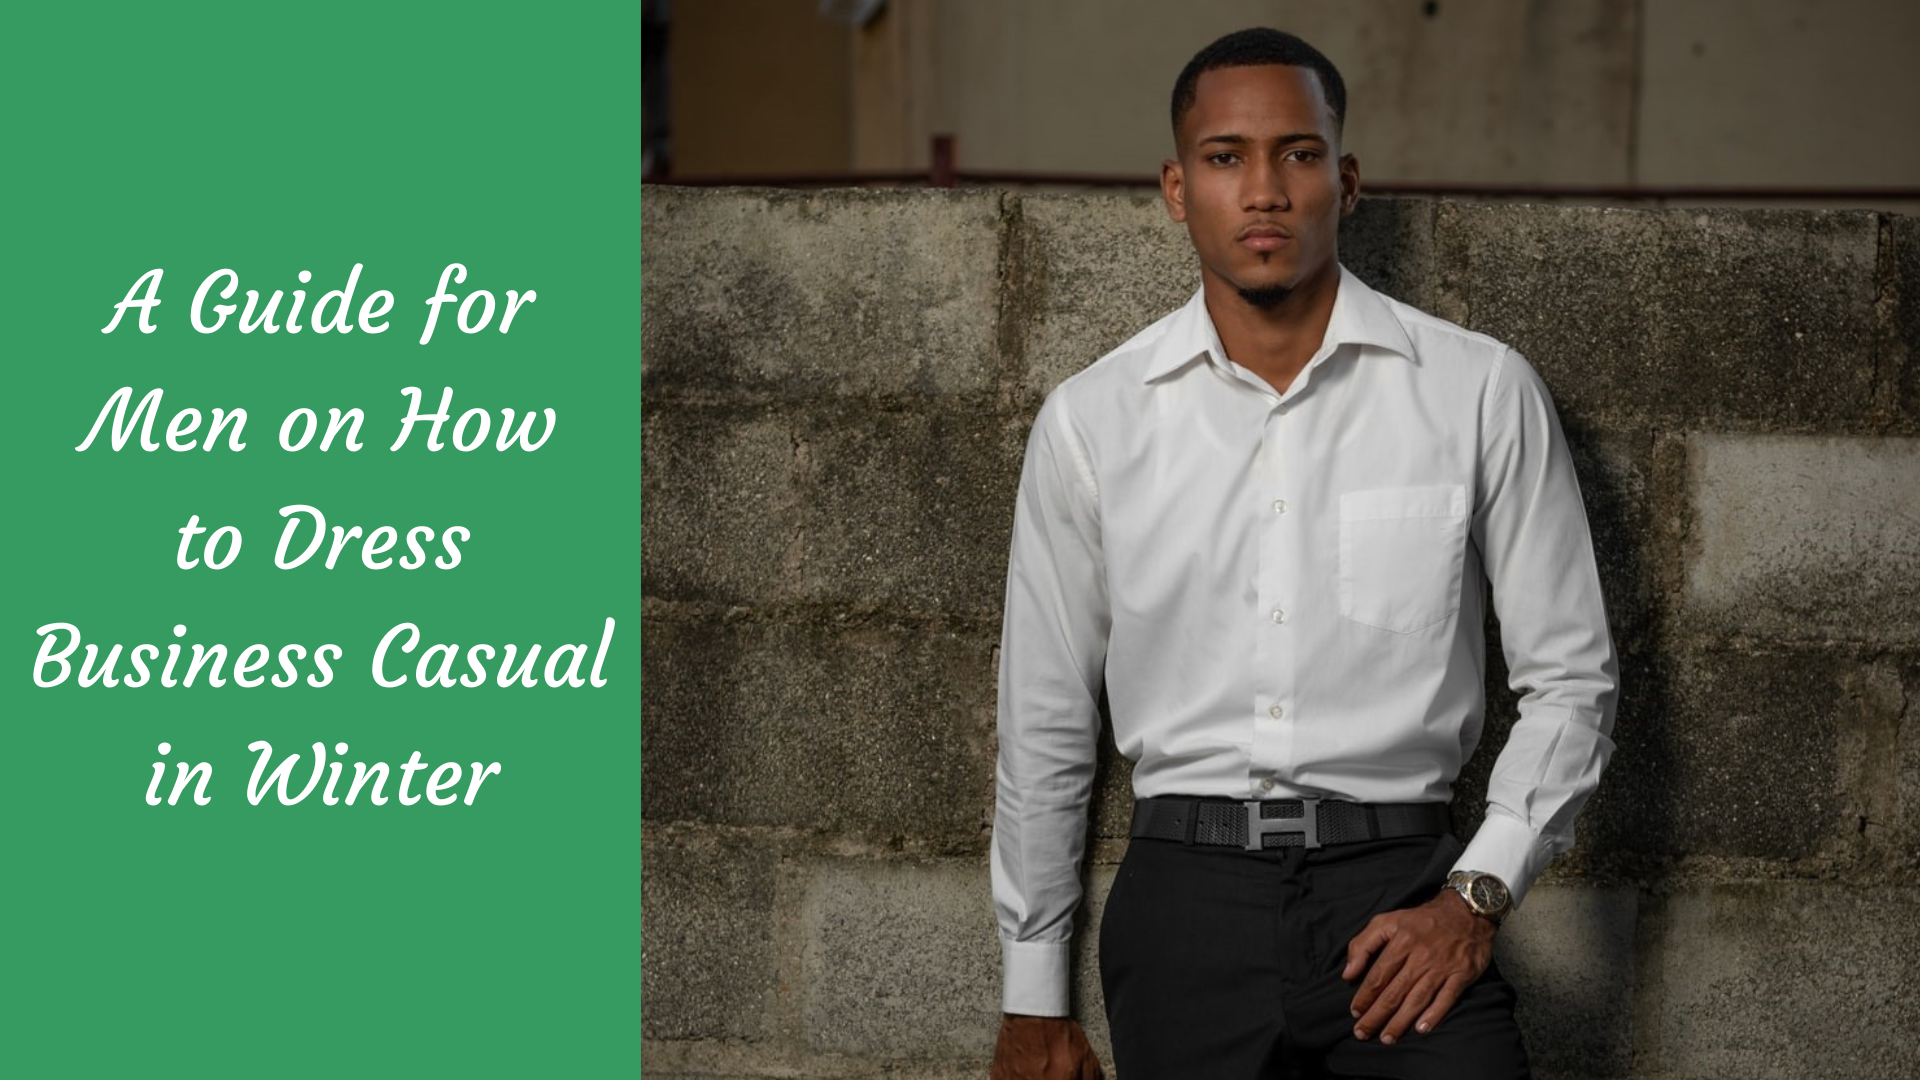 The Business Casual Dress Code Explained